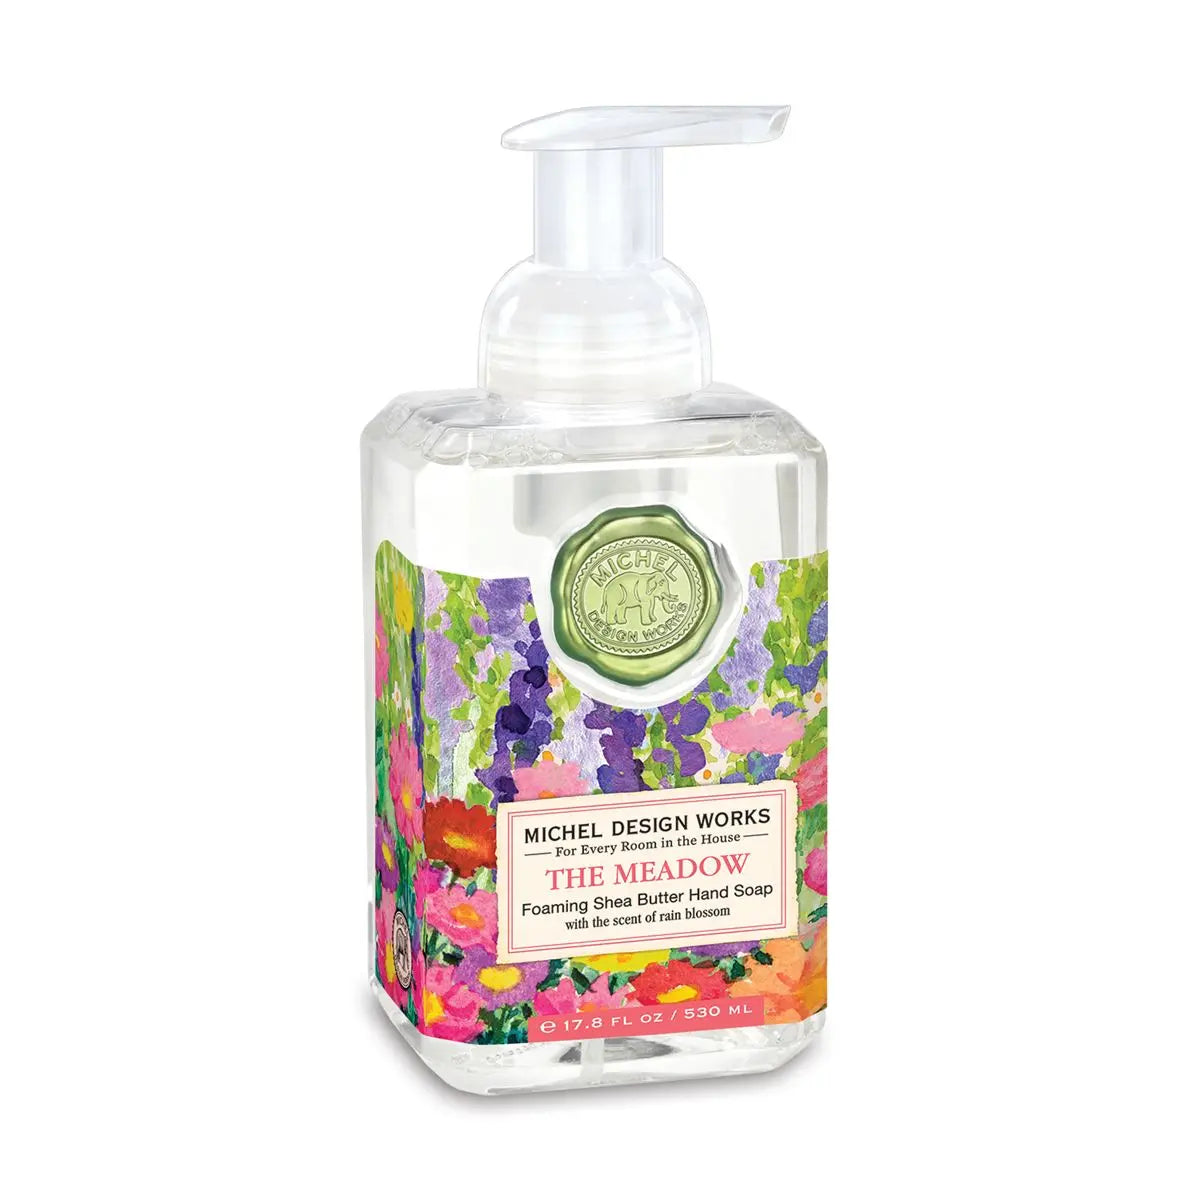 Michel Design Works The Meadow Foaming Hand Soap MICHEL DESIGN WORKS